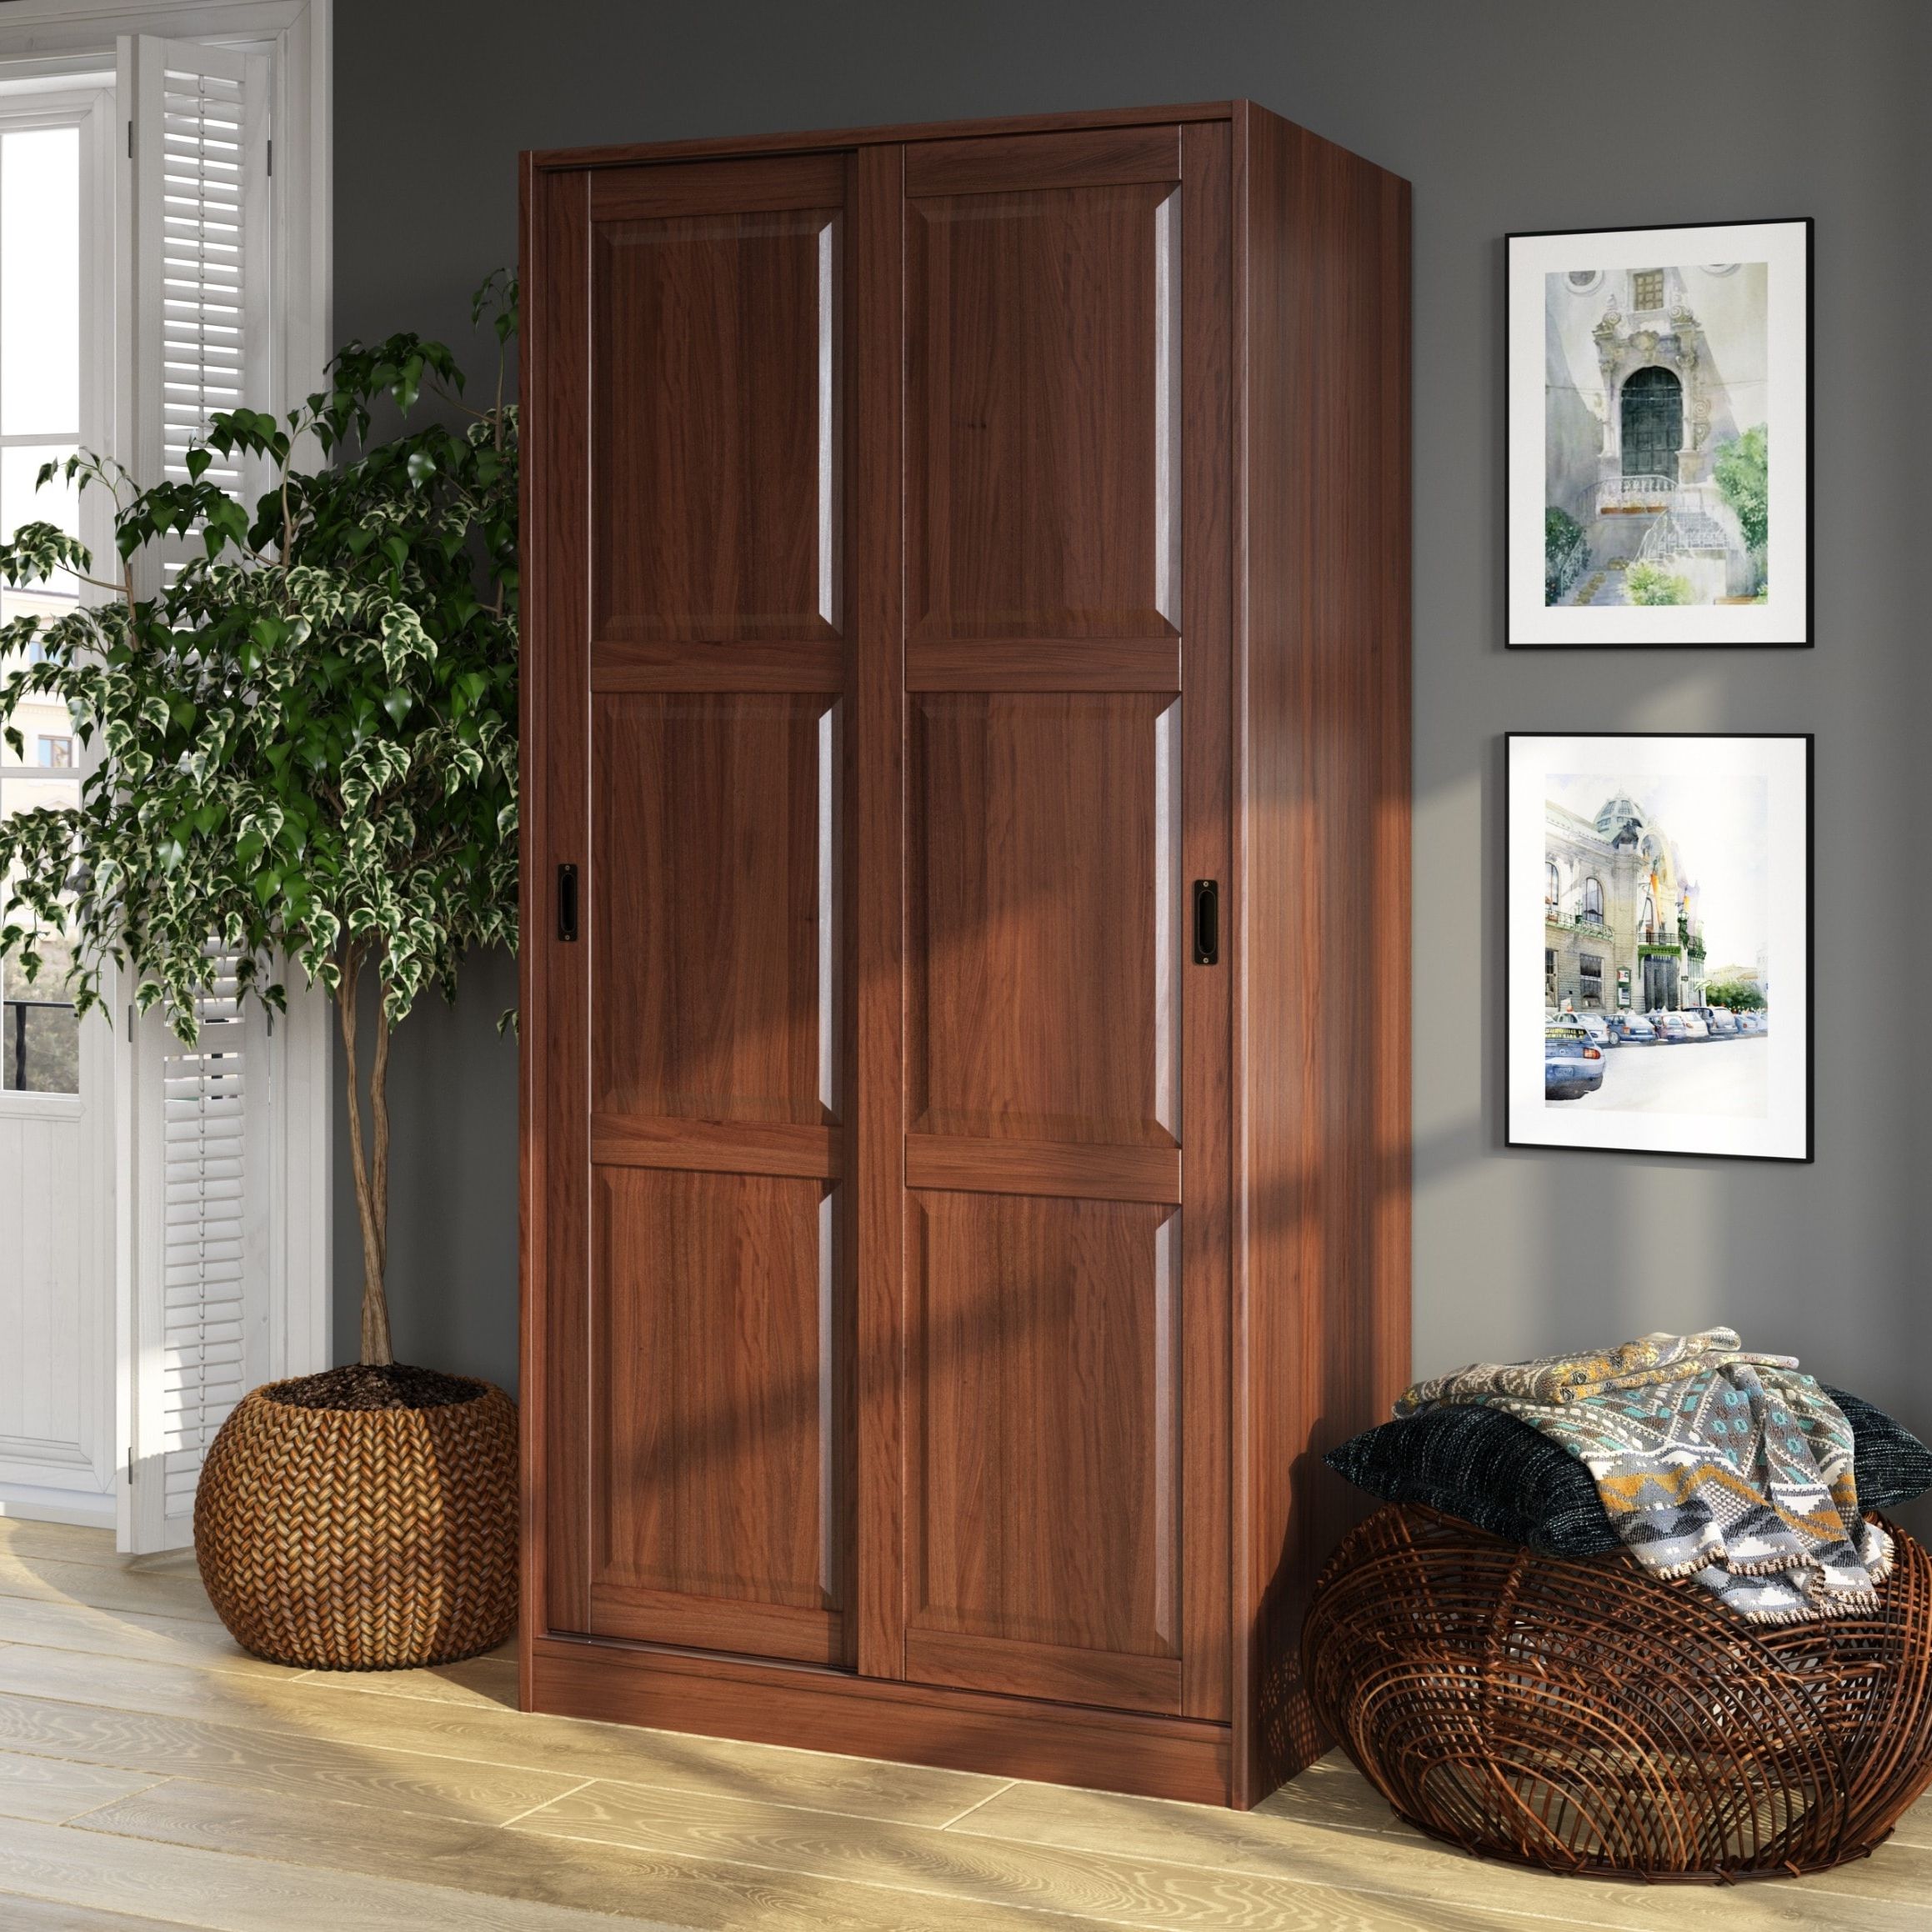 [%palace Imports 100% Solid Wood 2 Sliding Door Wardrobe Armoire With  Mirrored, Closed Louvered Or Raised Panel Doors – On Sale – Bed Bath &  Beyond – 20000830 With Regard To Preferred 2 Door Wardrobes|2 Door Wardrobes Throughout Favorite Palace Imports 100% Solid Wood 2 Sliding Door Wardrobe Armoire With  Mirrored, Closed Louvered Or Raised Panel Doors – On Sale – Bed Bath &  Beyond – 20000830|most Up To Date 2 Door Wardrobes In Palace Imports 100% Solid Wood 2 Sliding Door Wardrobe Armoire With  Mirrored, Closed Louvered Or Raised Panel Doors – On Sale – Bed Bath &  Beyond – 20000830|most Recently Released Palace Imports 100% Solid Wood 2 Sliding Door Wardrobe Armoire With  Mirrored, Closed Louvered Or Raised Panel Doors – On Sale – Bed Bath &  Beyond – 20000830 Intended For 2 Door Wardrobes%] (Photo 4 of 10)